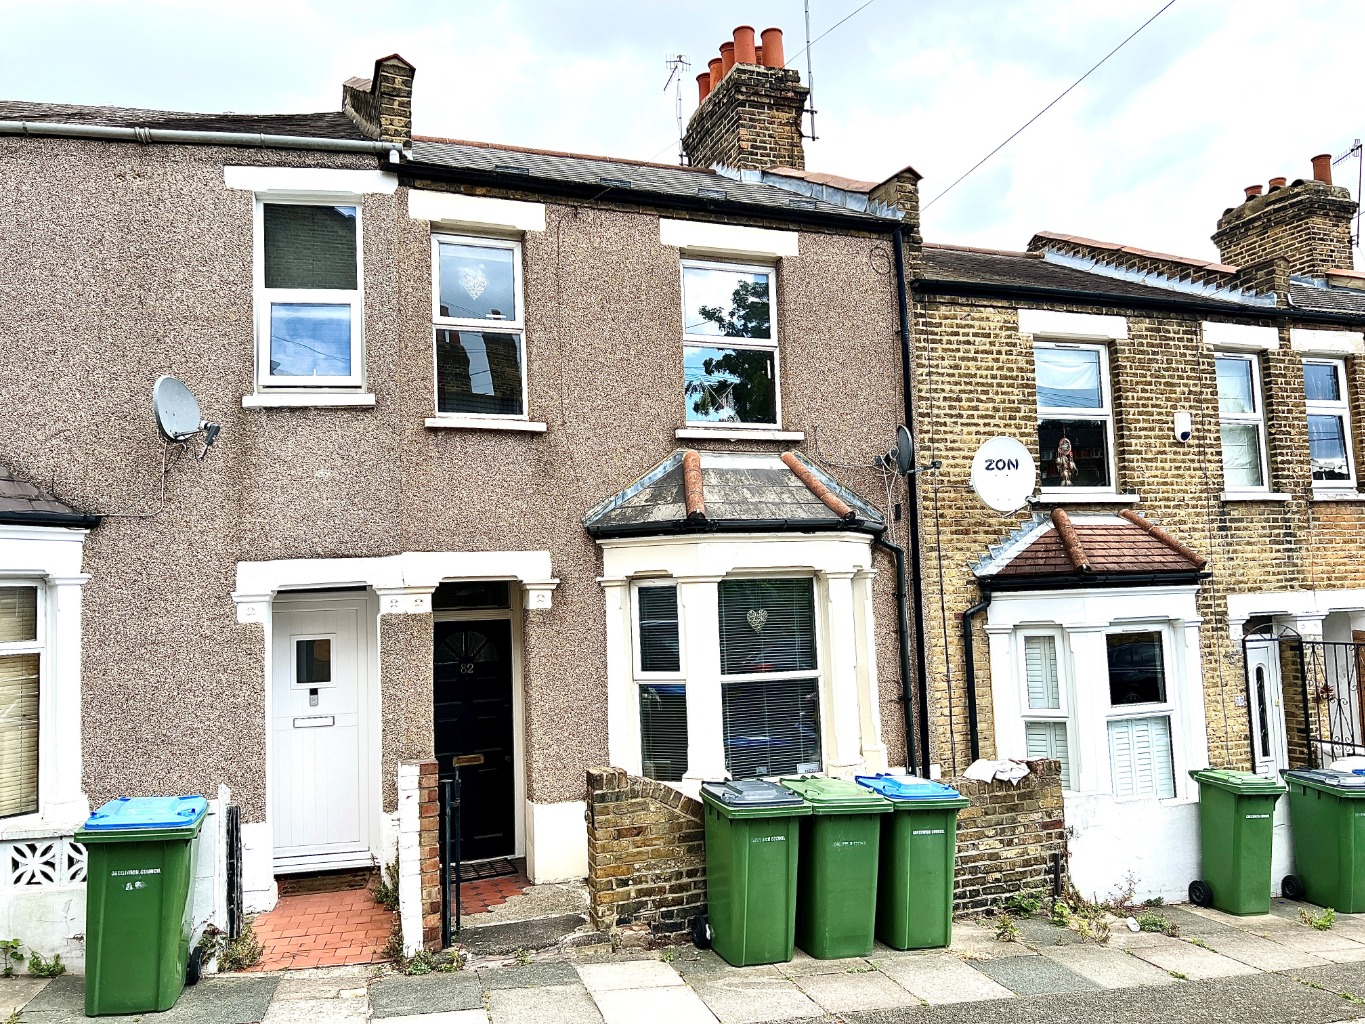 Beaumont Gibbs are offering for sale this spacious two double bedroomed Victorian mid terrace house for sale. Situated close by to local shops and bus routes from Plumstead Common Road, the house would make a great Buy to Let investment or first time purchase.